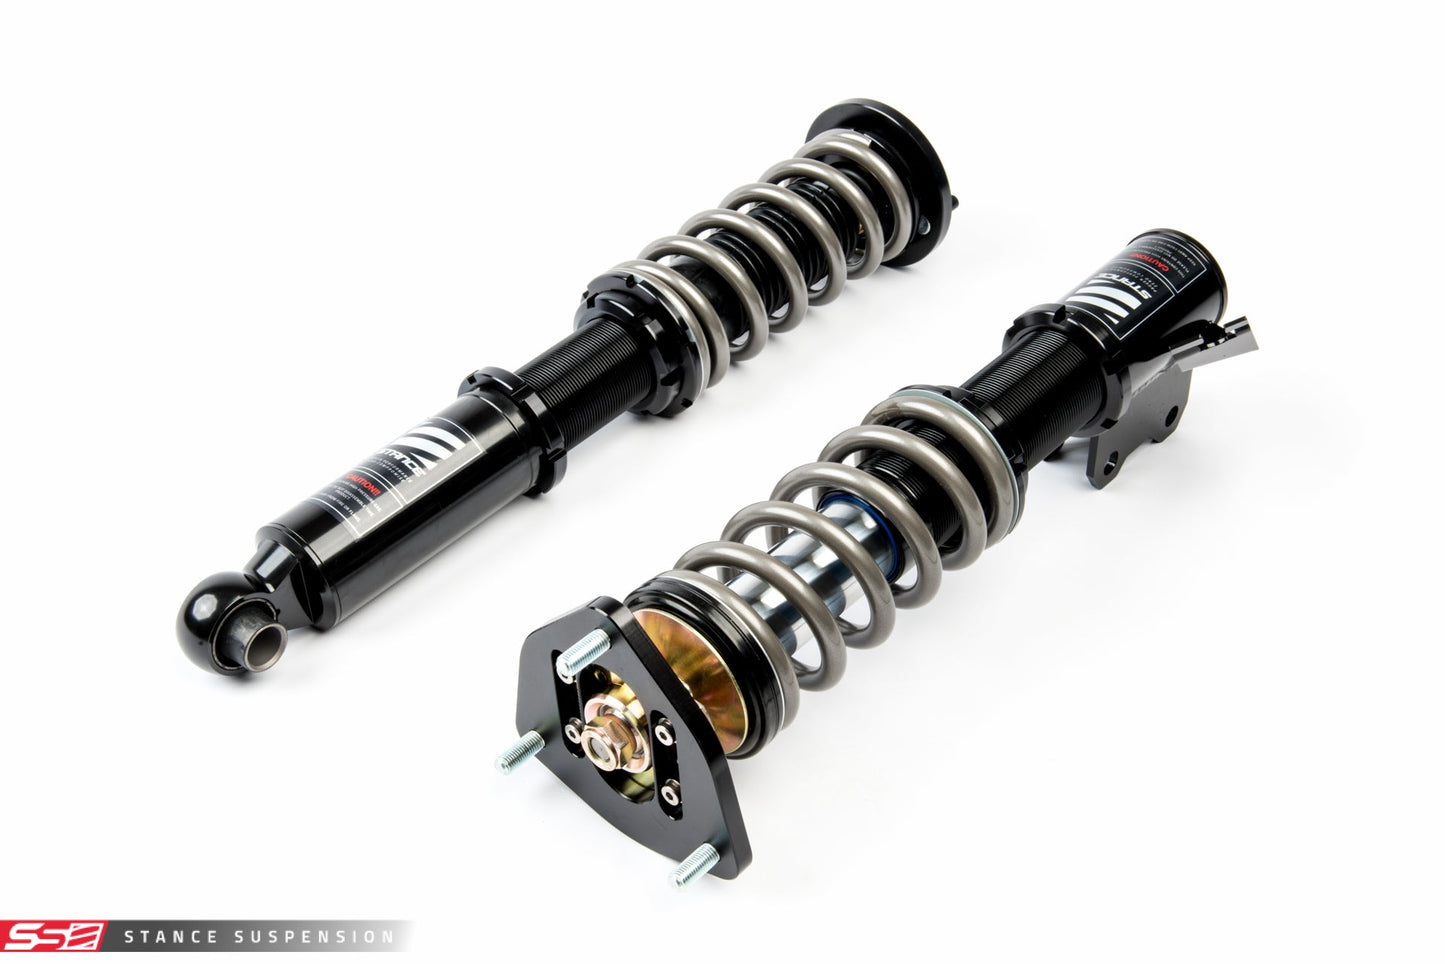 Stance Suspension - XR1 Coilovers for 89-93 Nissan 240SX S13 (ST-S13-XR1)